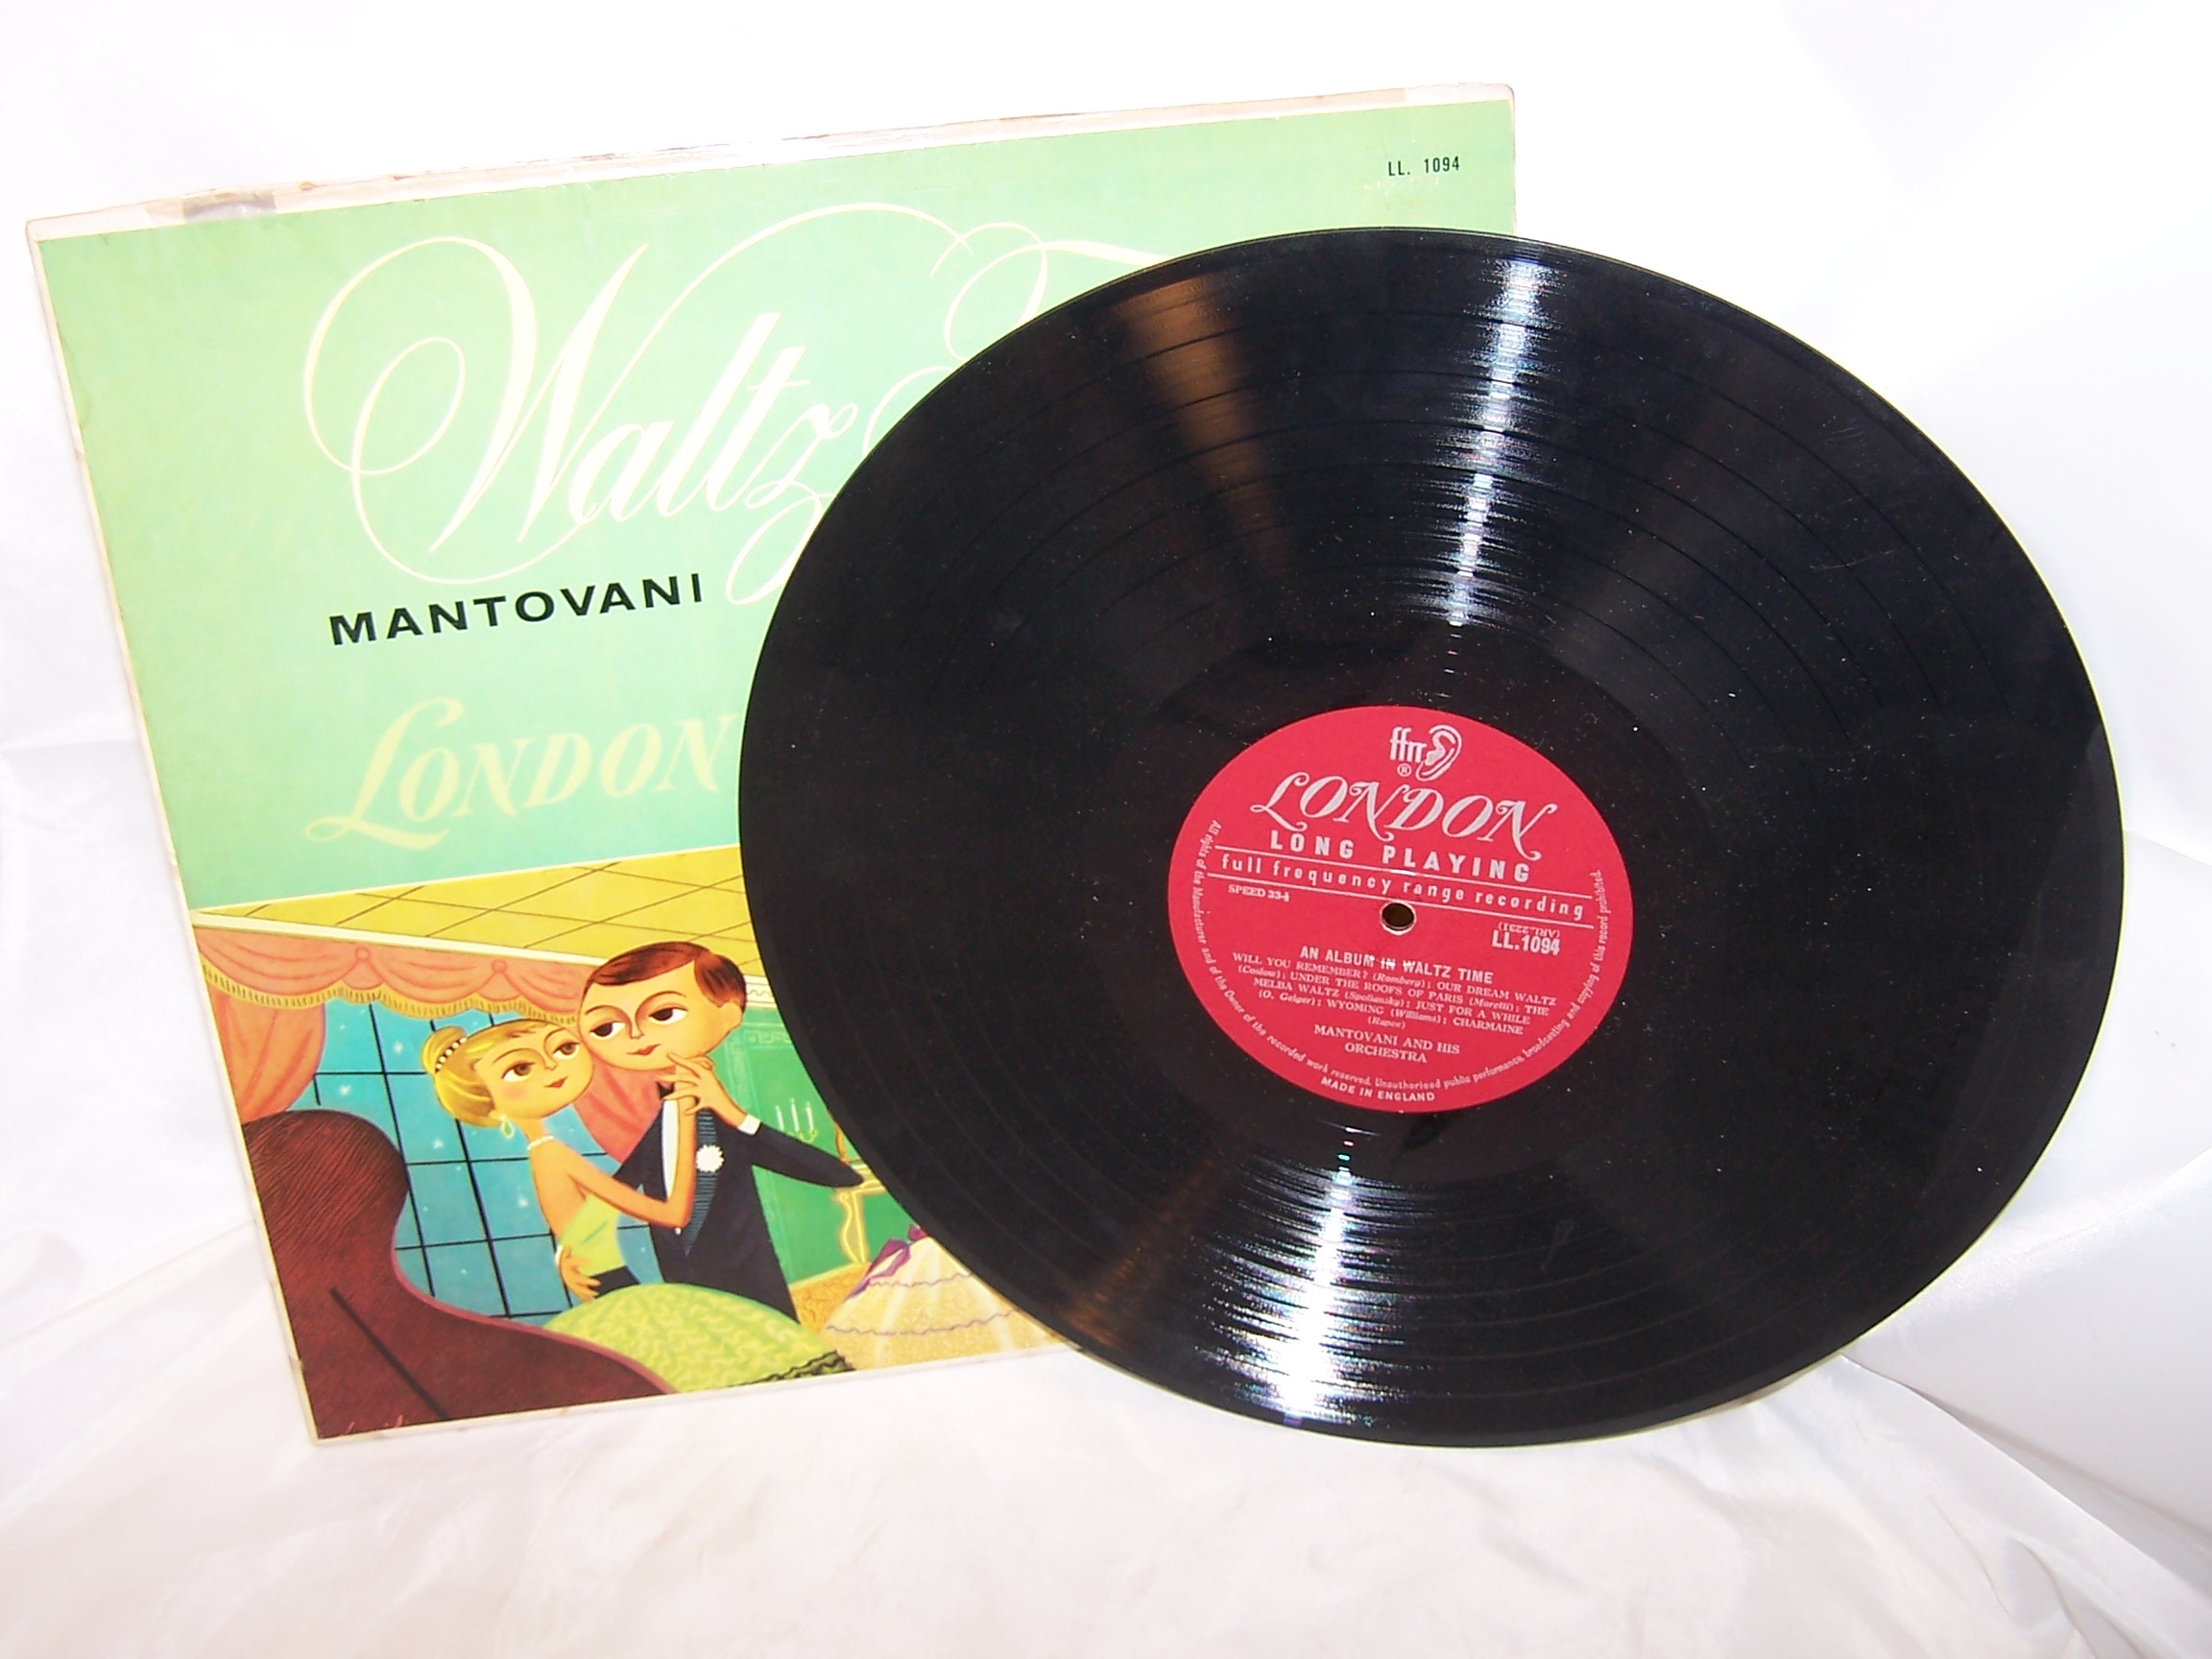 Image 3 of Mantovani and Orchestra, Waltz Time, England, Vintage